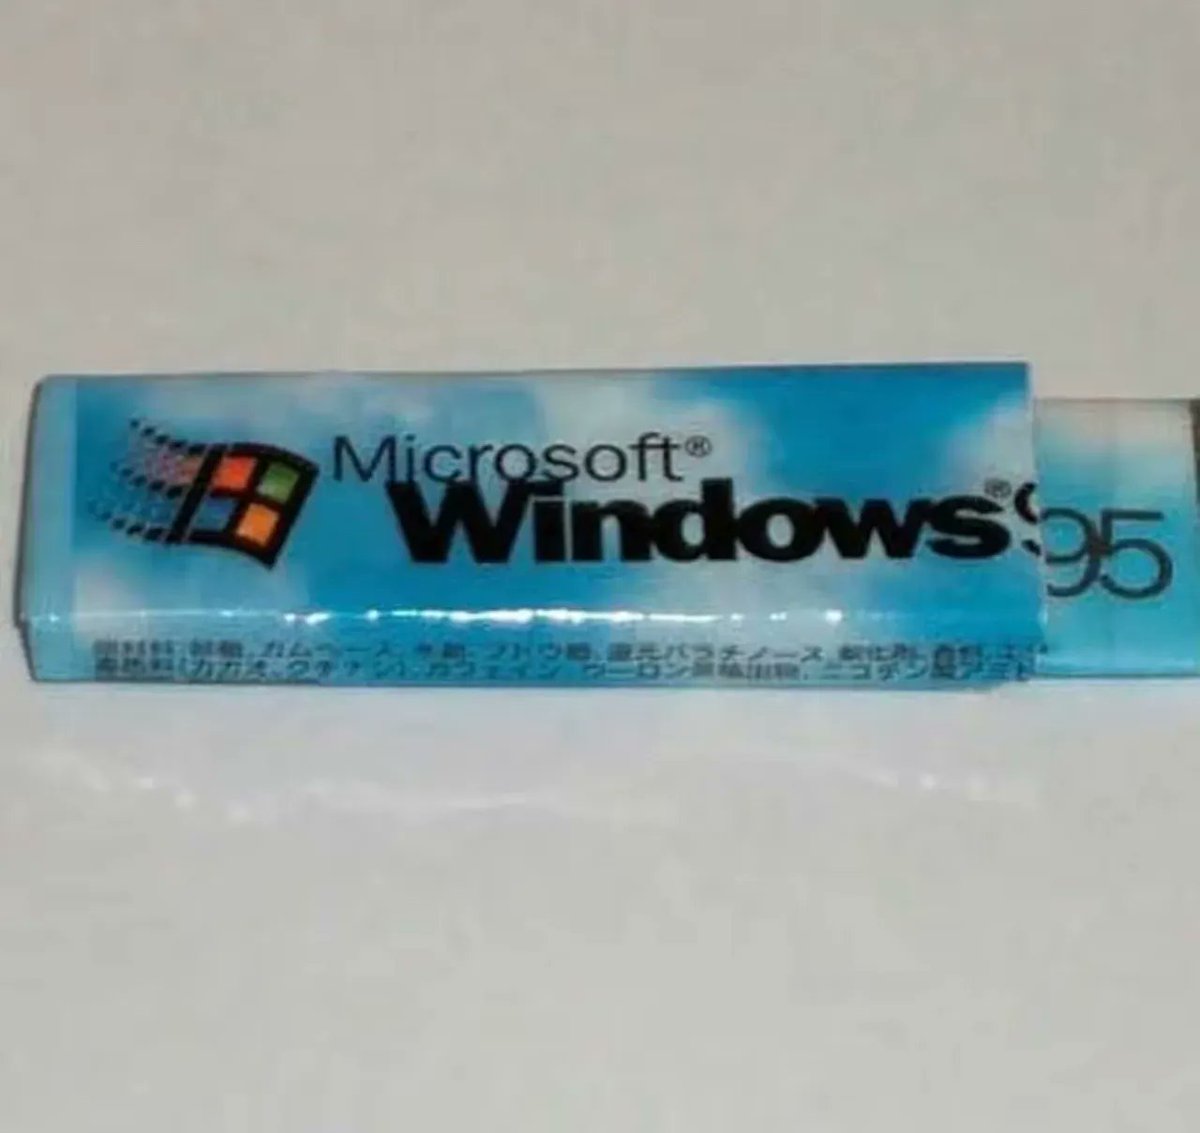 What's wrong, babe? You've barely touched your Windows 95 gum.